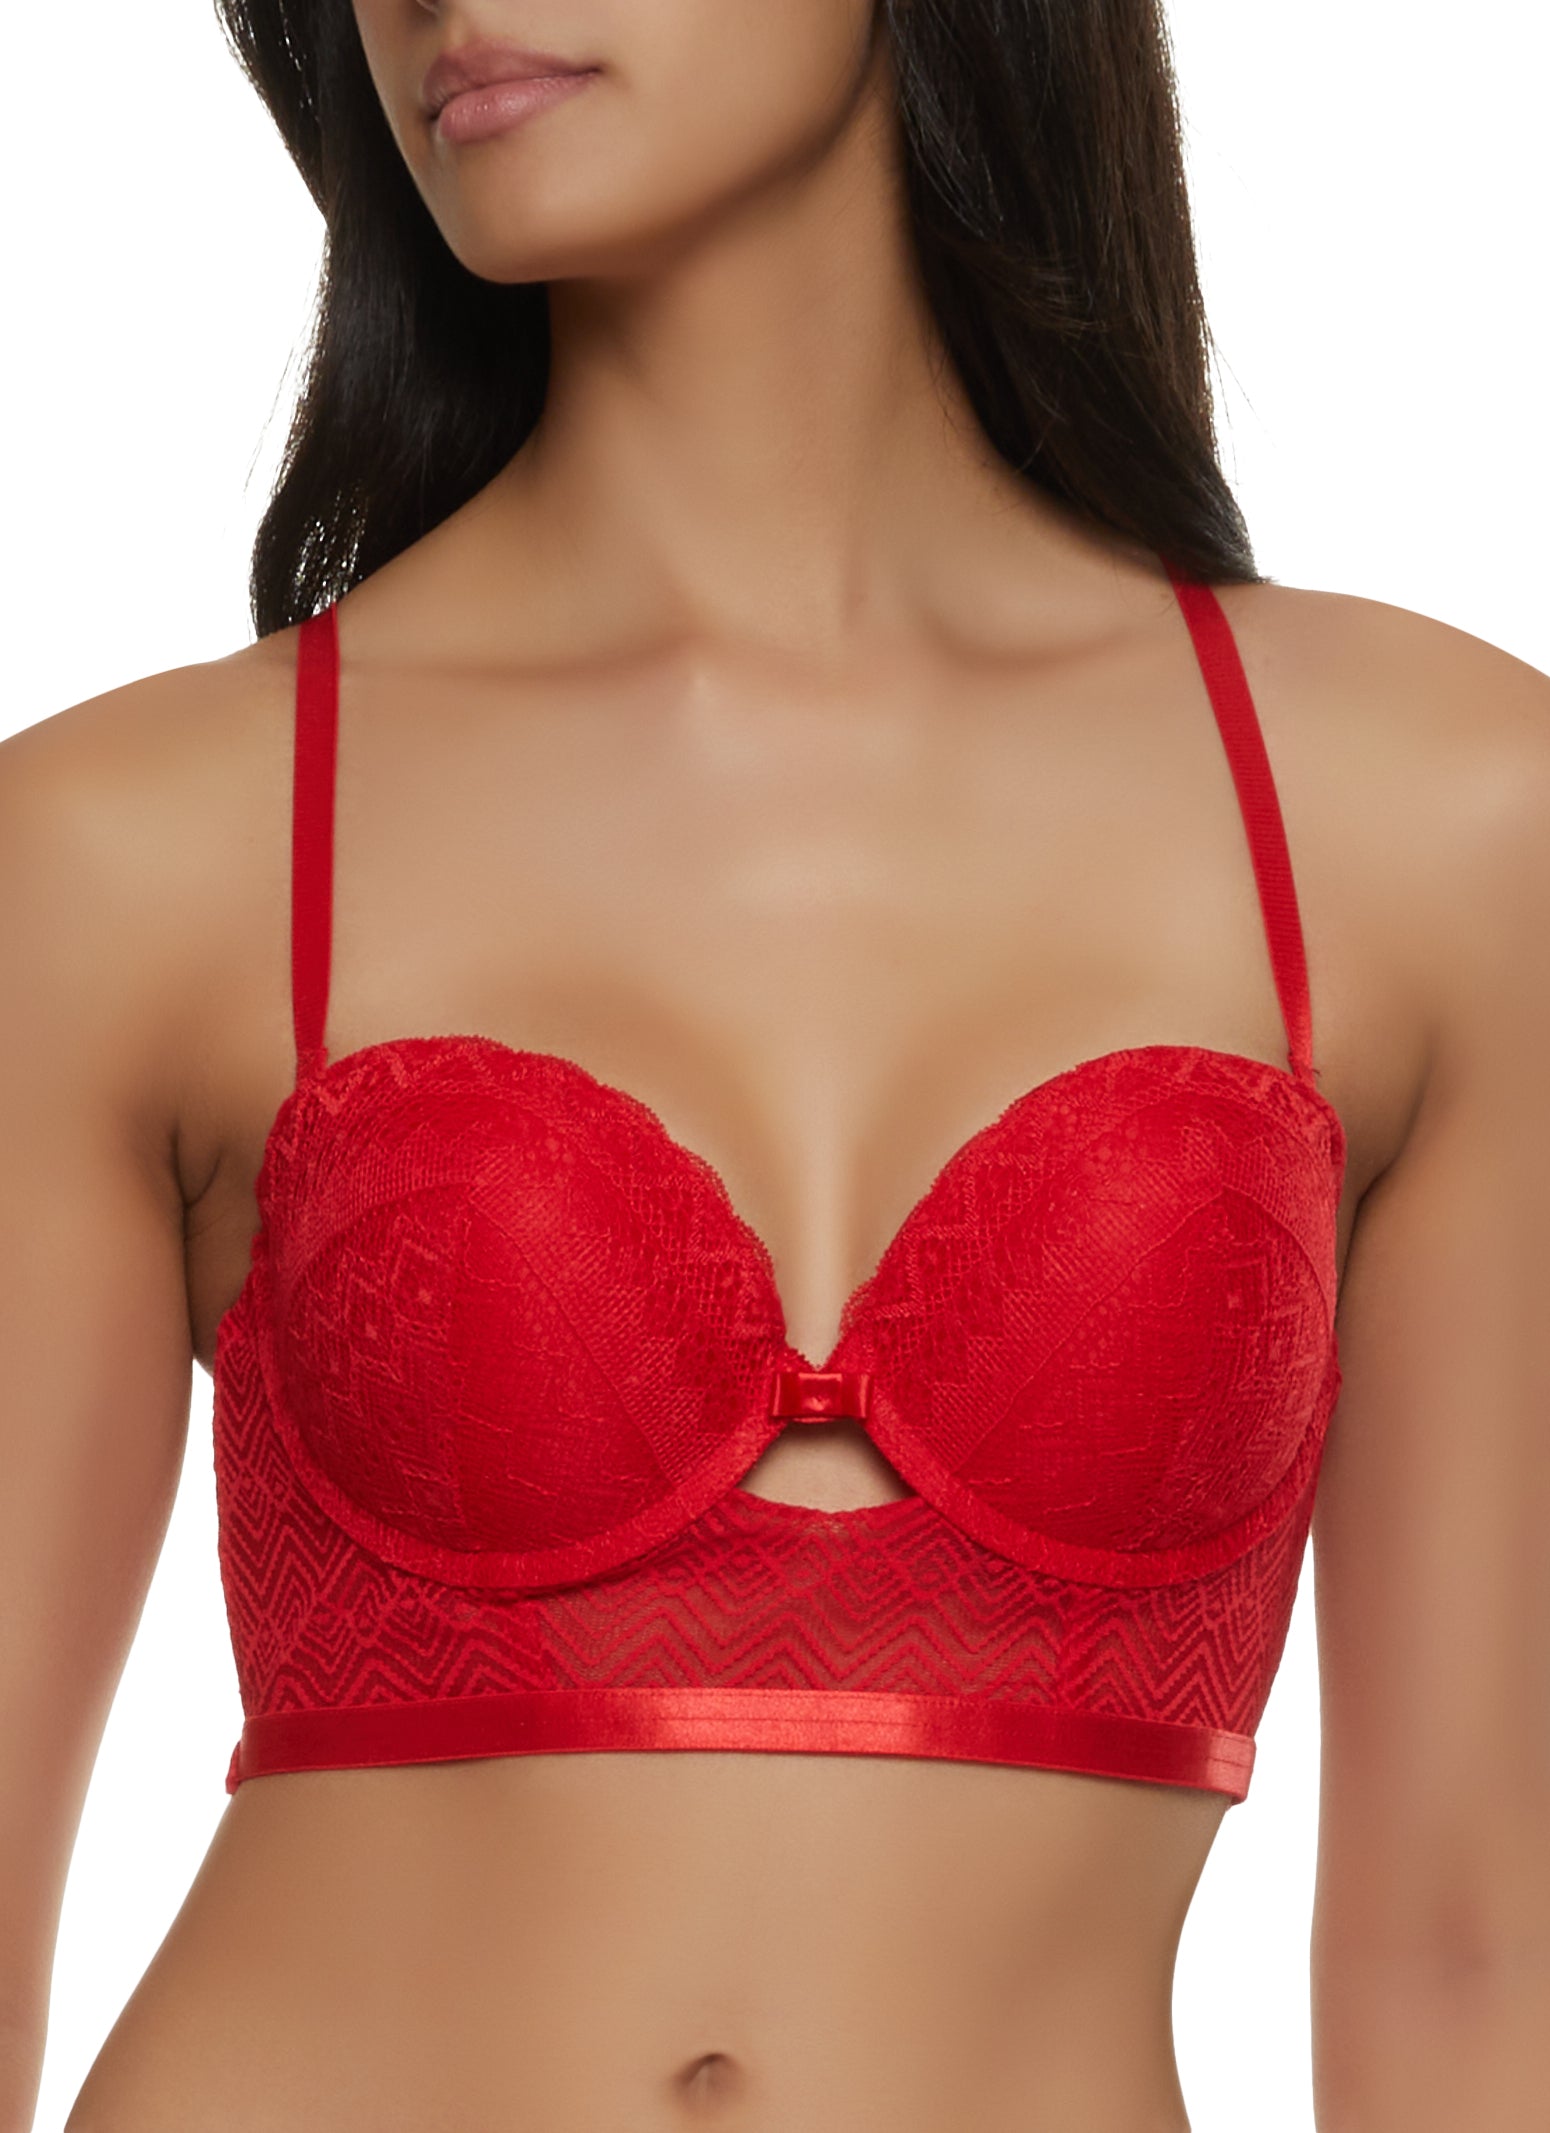 Buy Padded Underwired Strapless T-Shirt Bra with Balconette Style